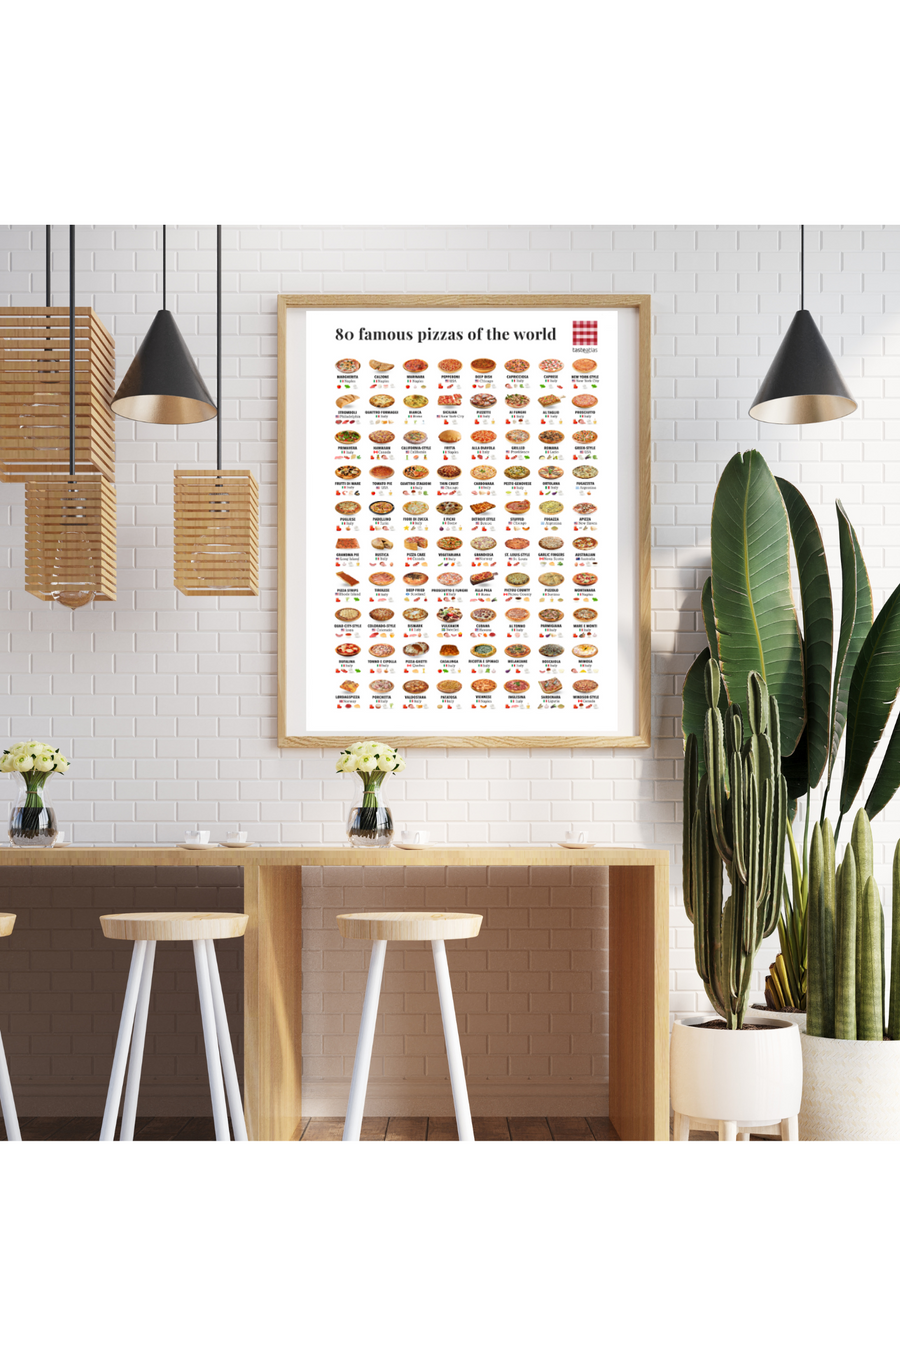 80 famous pizzas of the world poster hanging above the bar